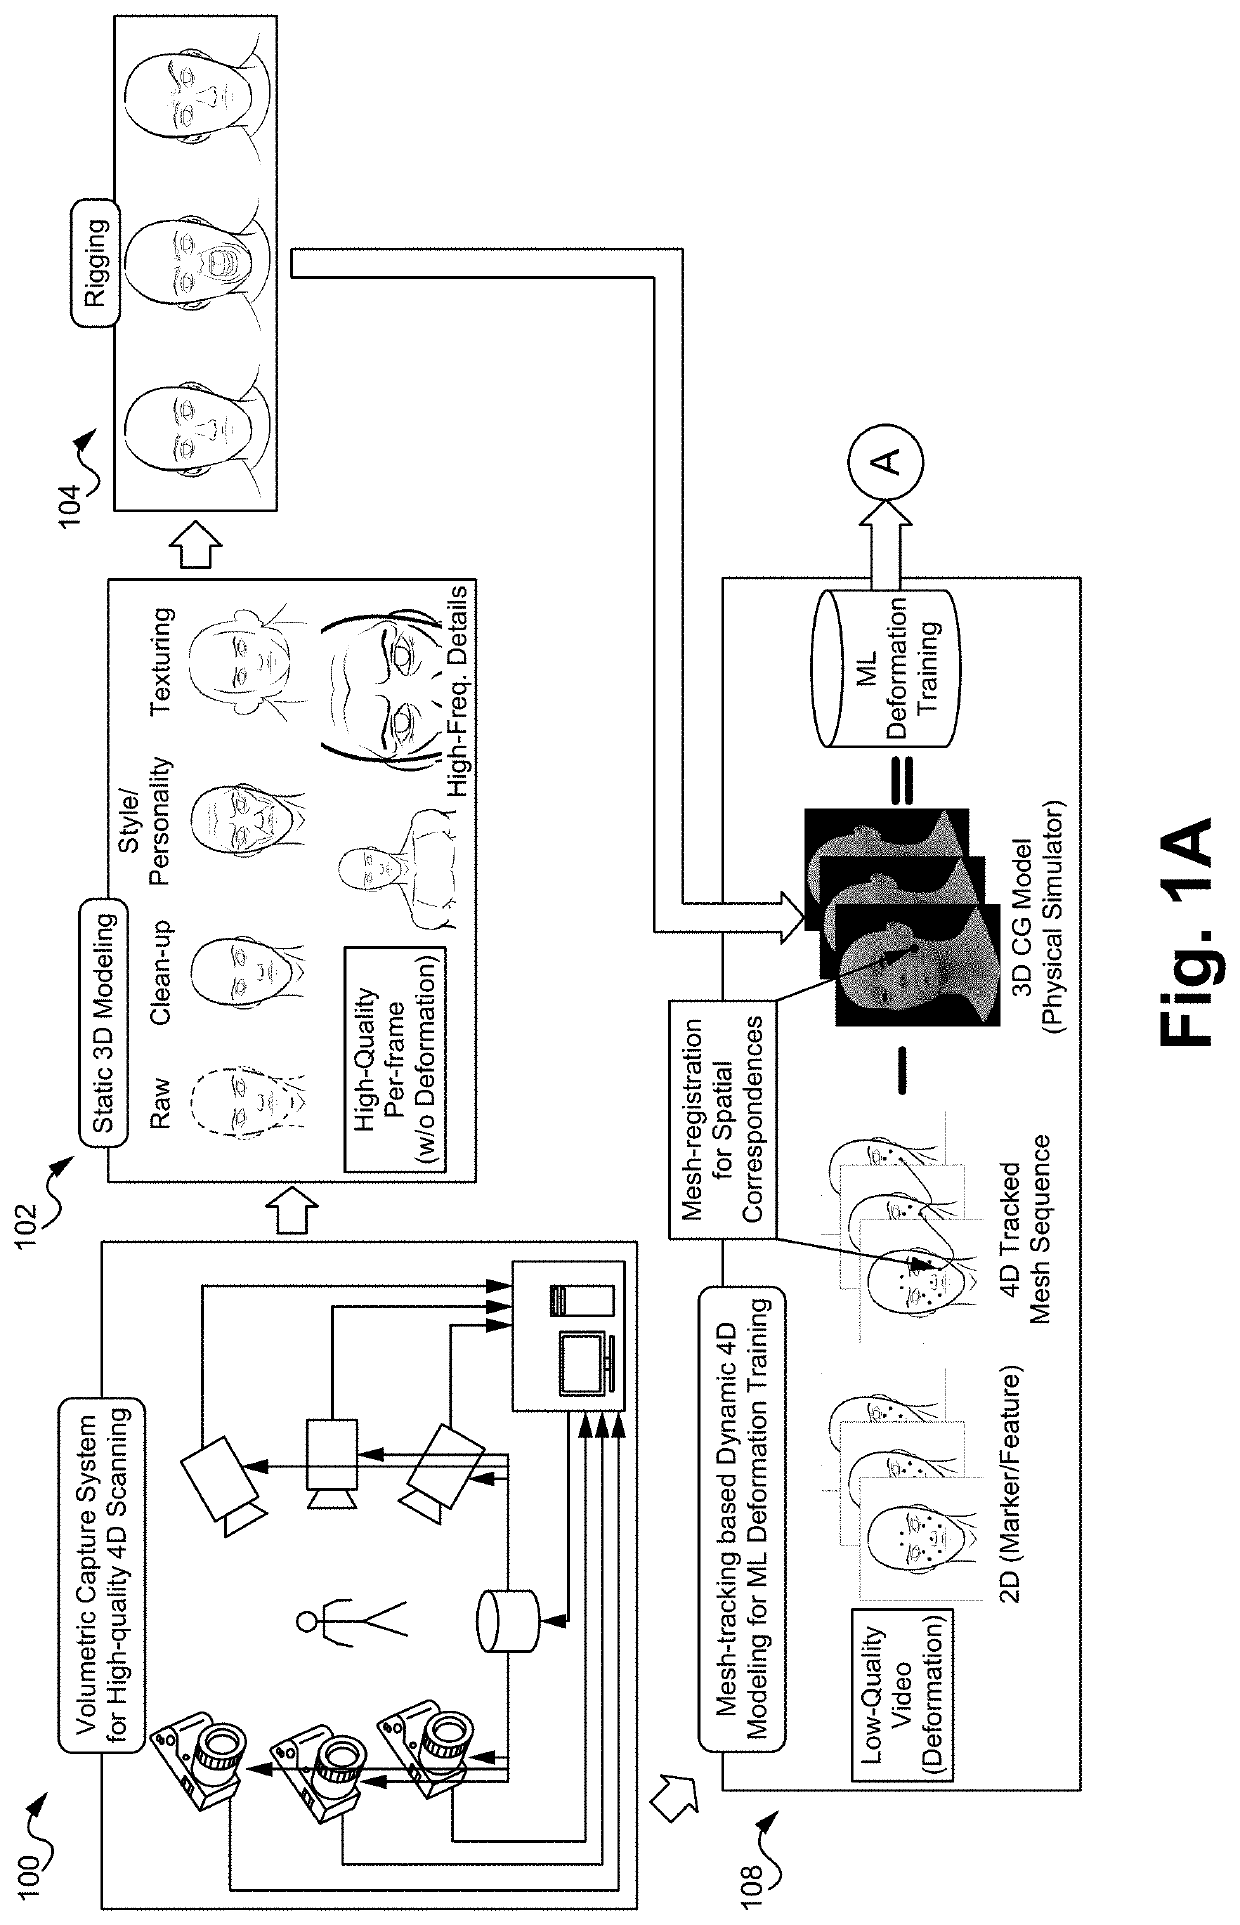 Volumetric capture and mesh-tracking based machine learning 4d face/body deformation training